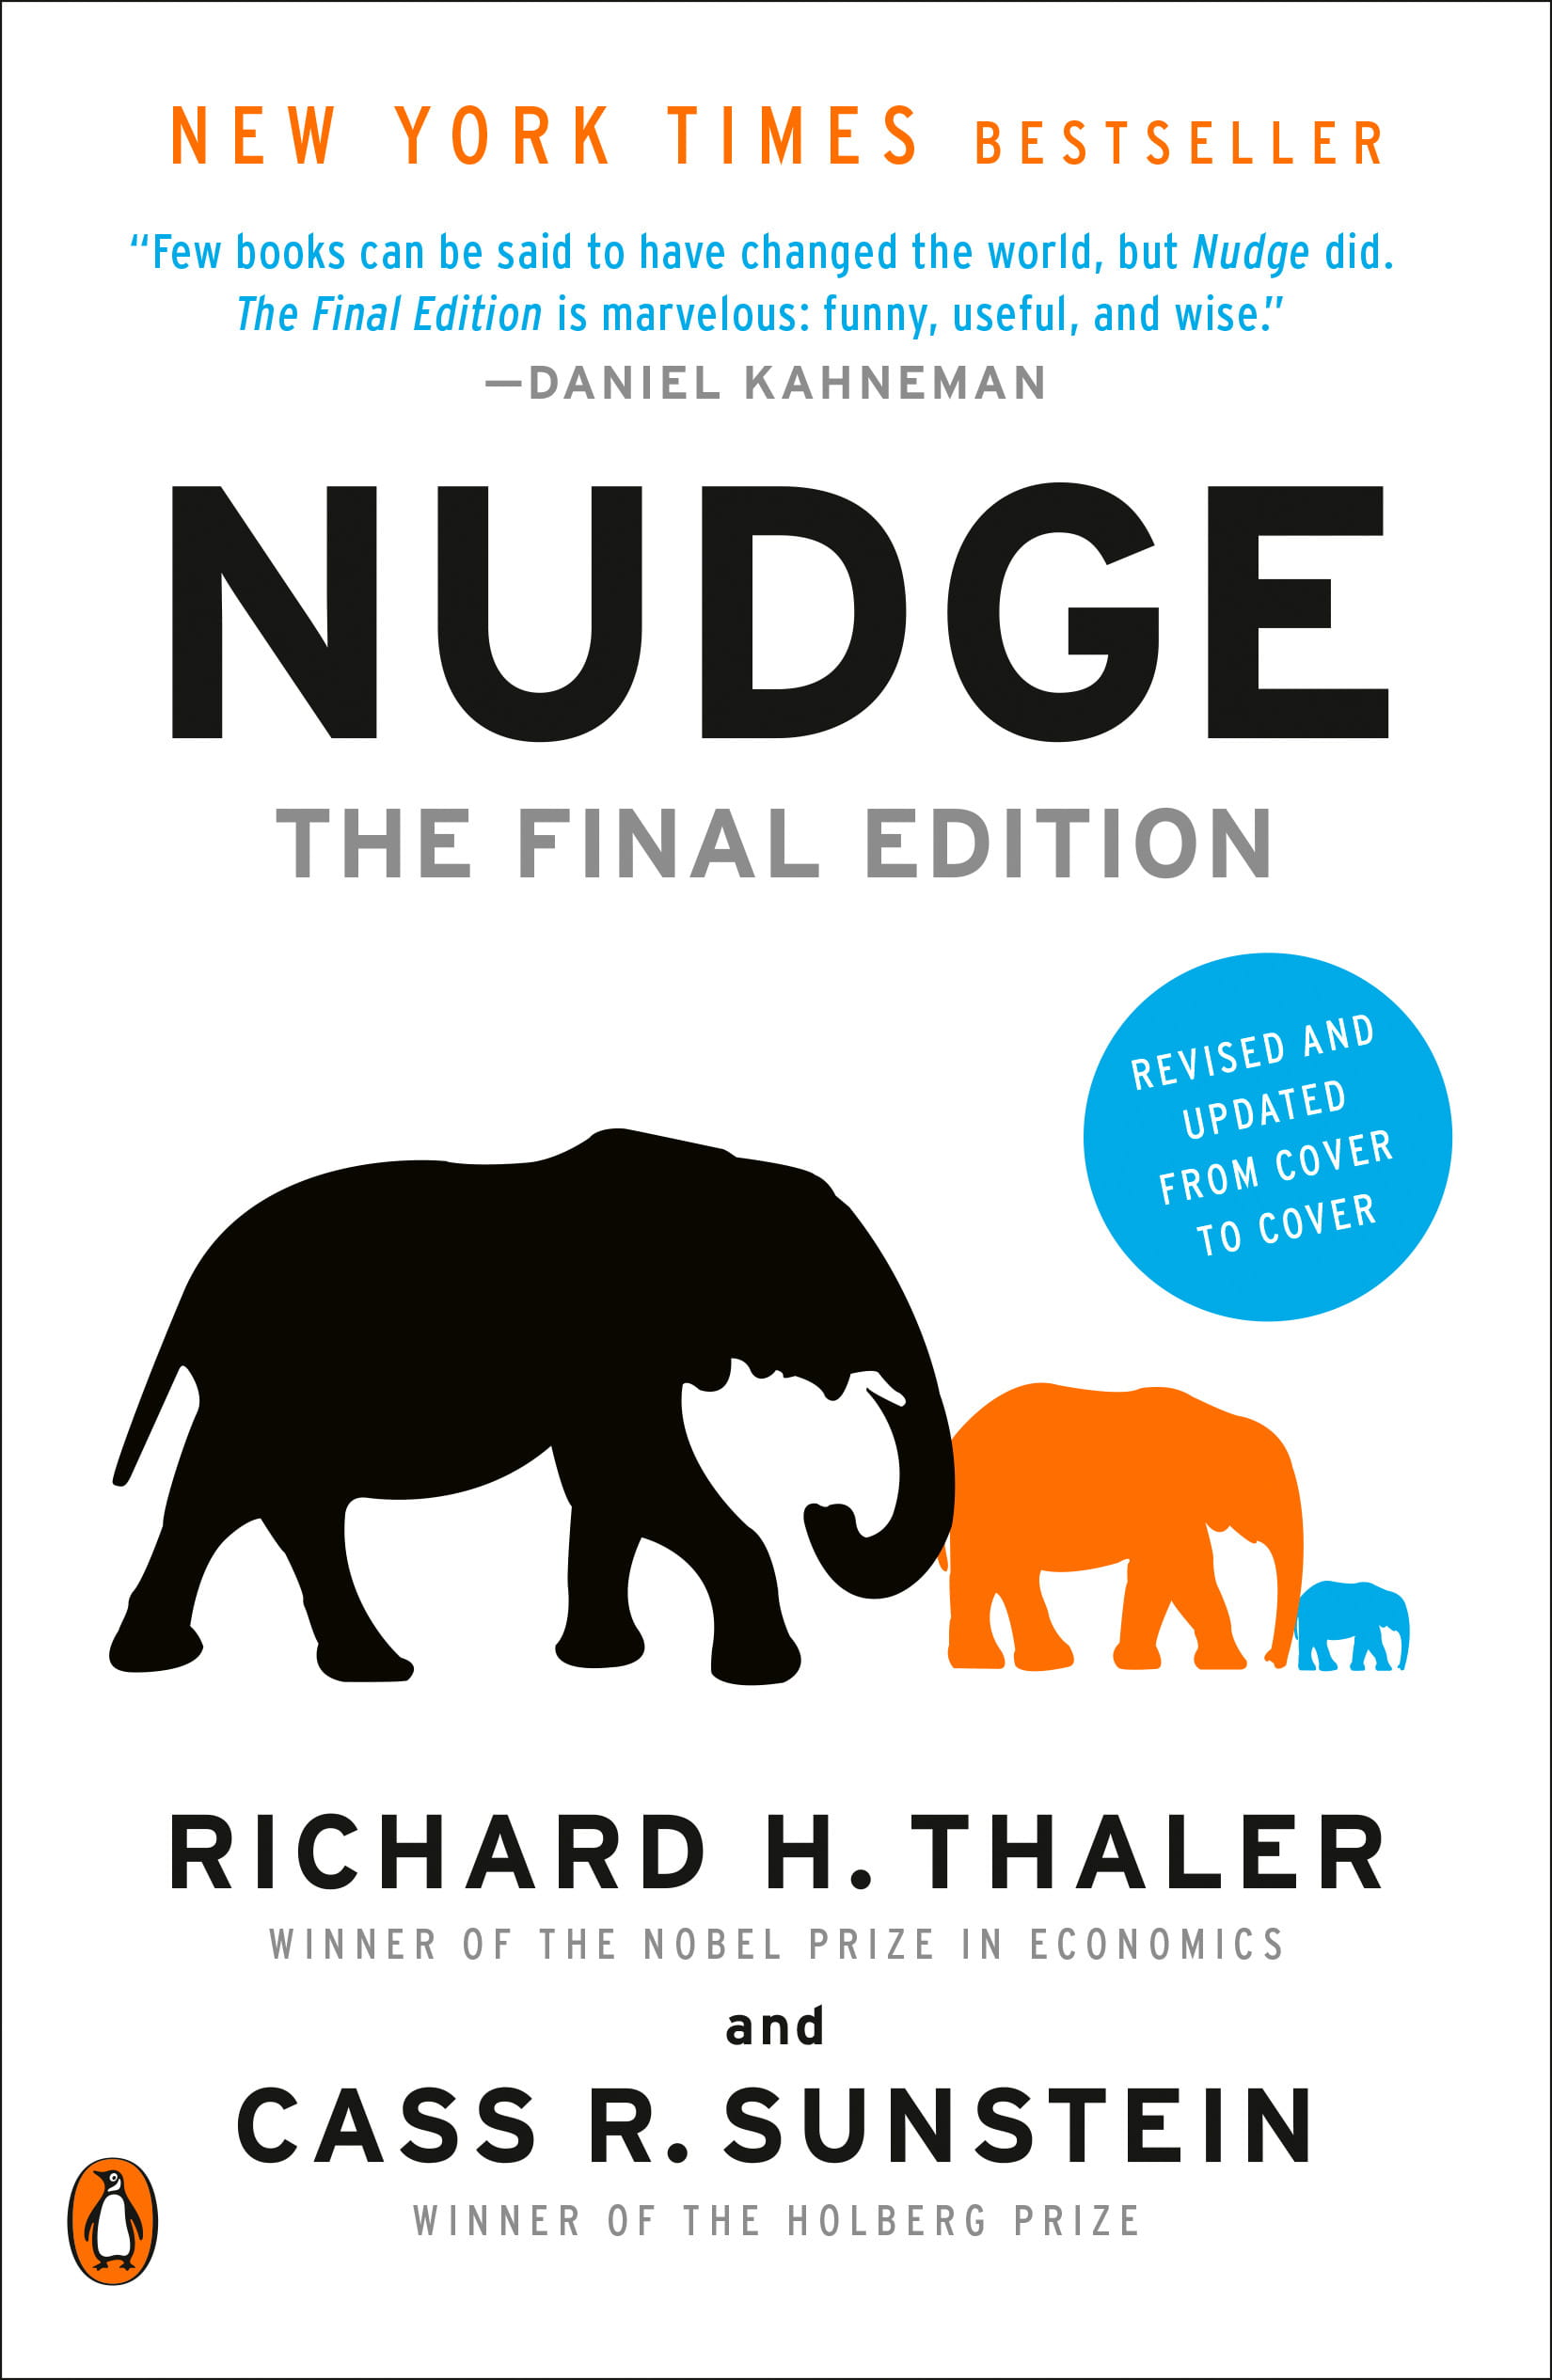 Cover of the book “Nudge”